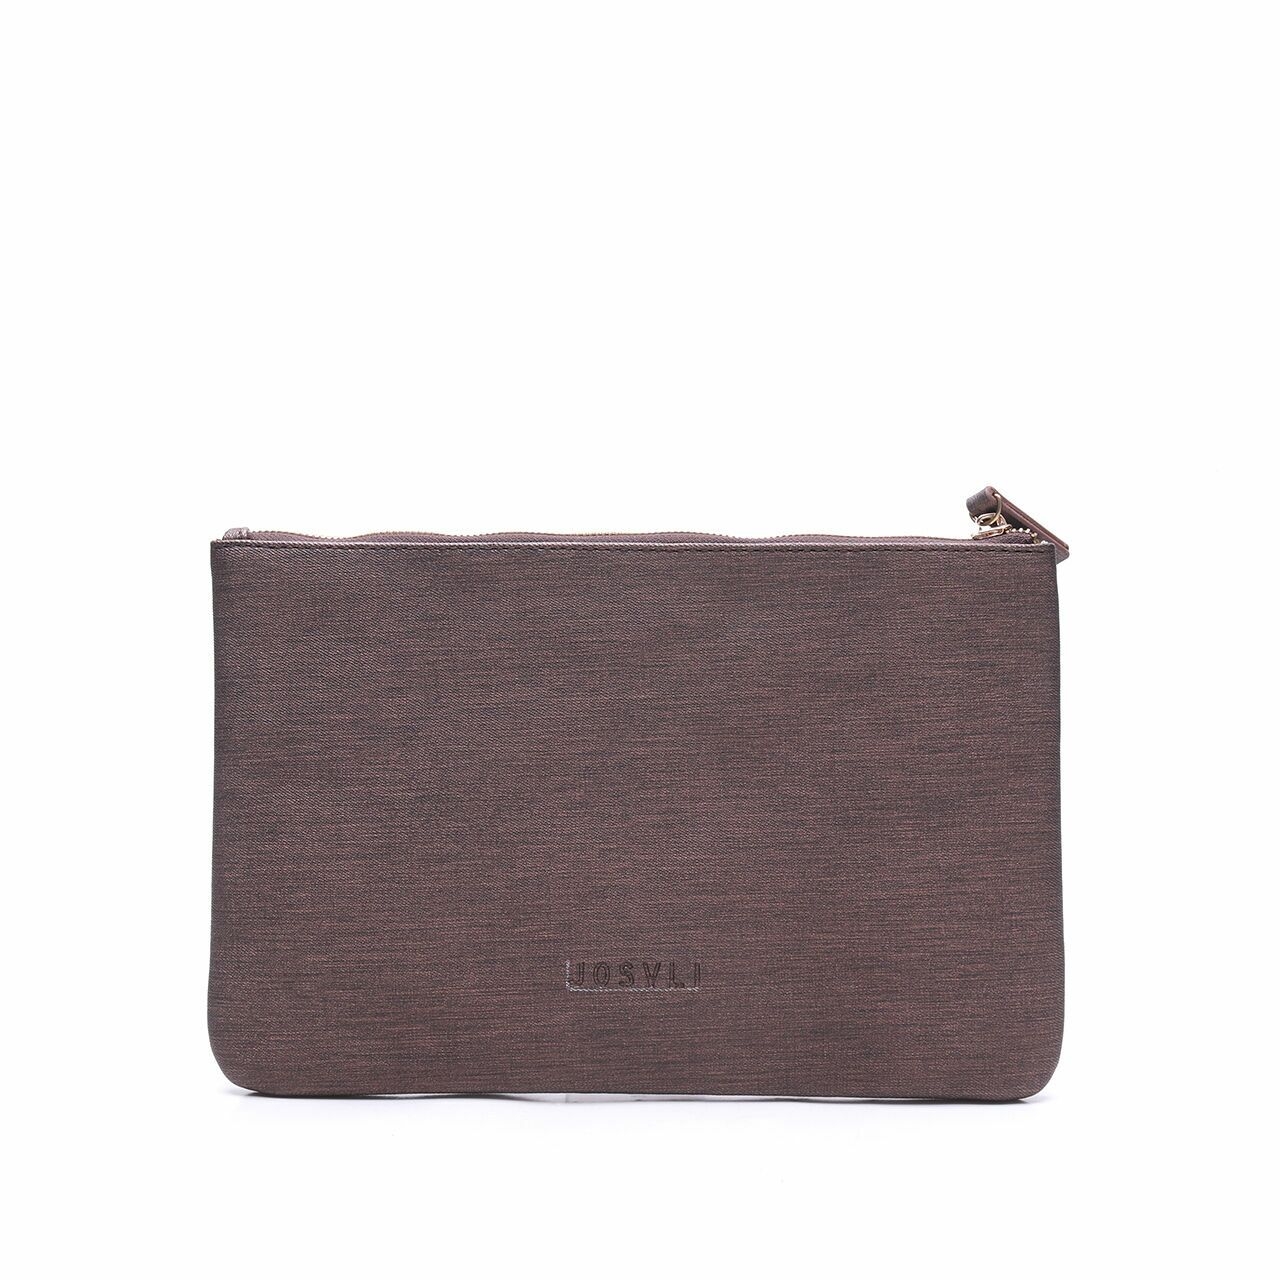 Josvli Brown Pouch